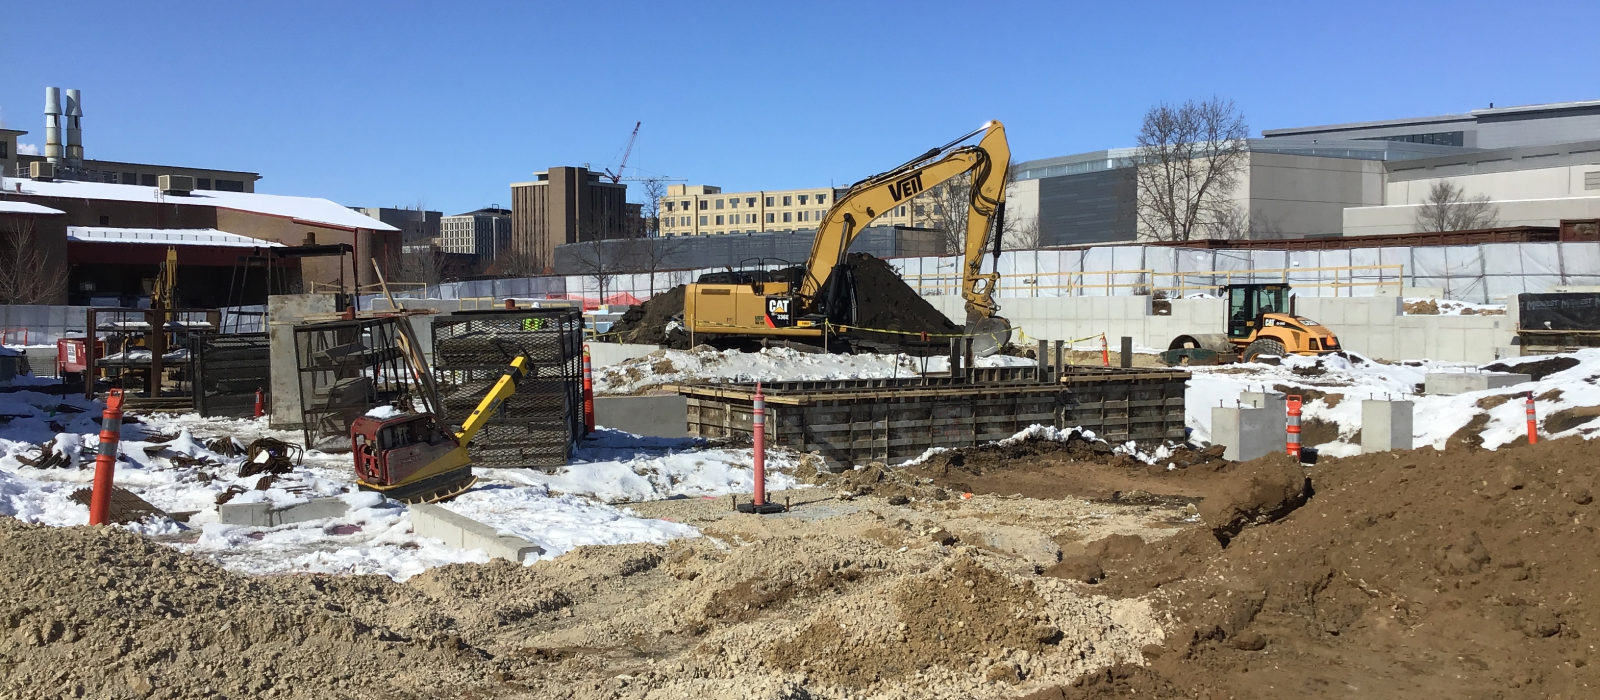 Our Crew Working At Hilton Garden Inn - UW Madison With Complete Heavy Equipment